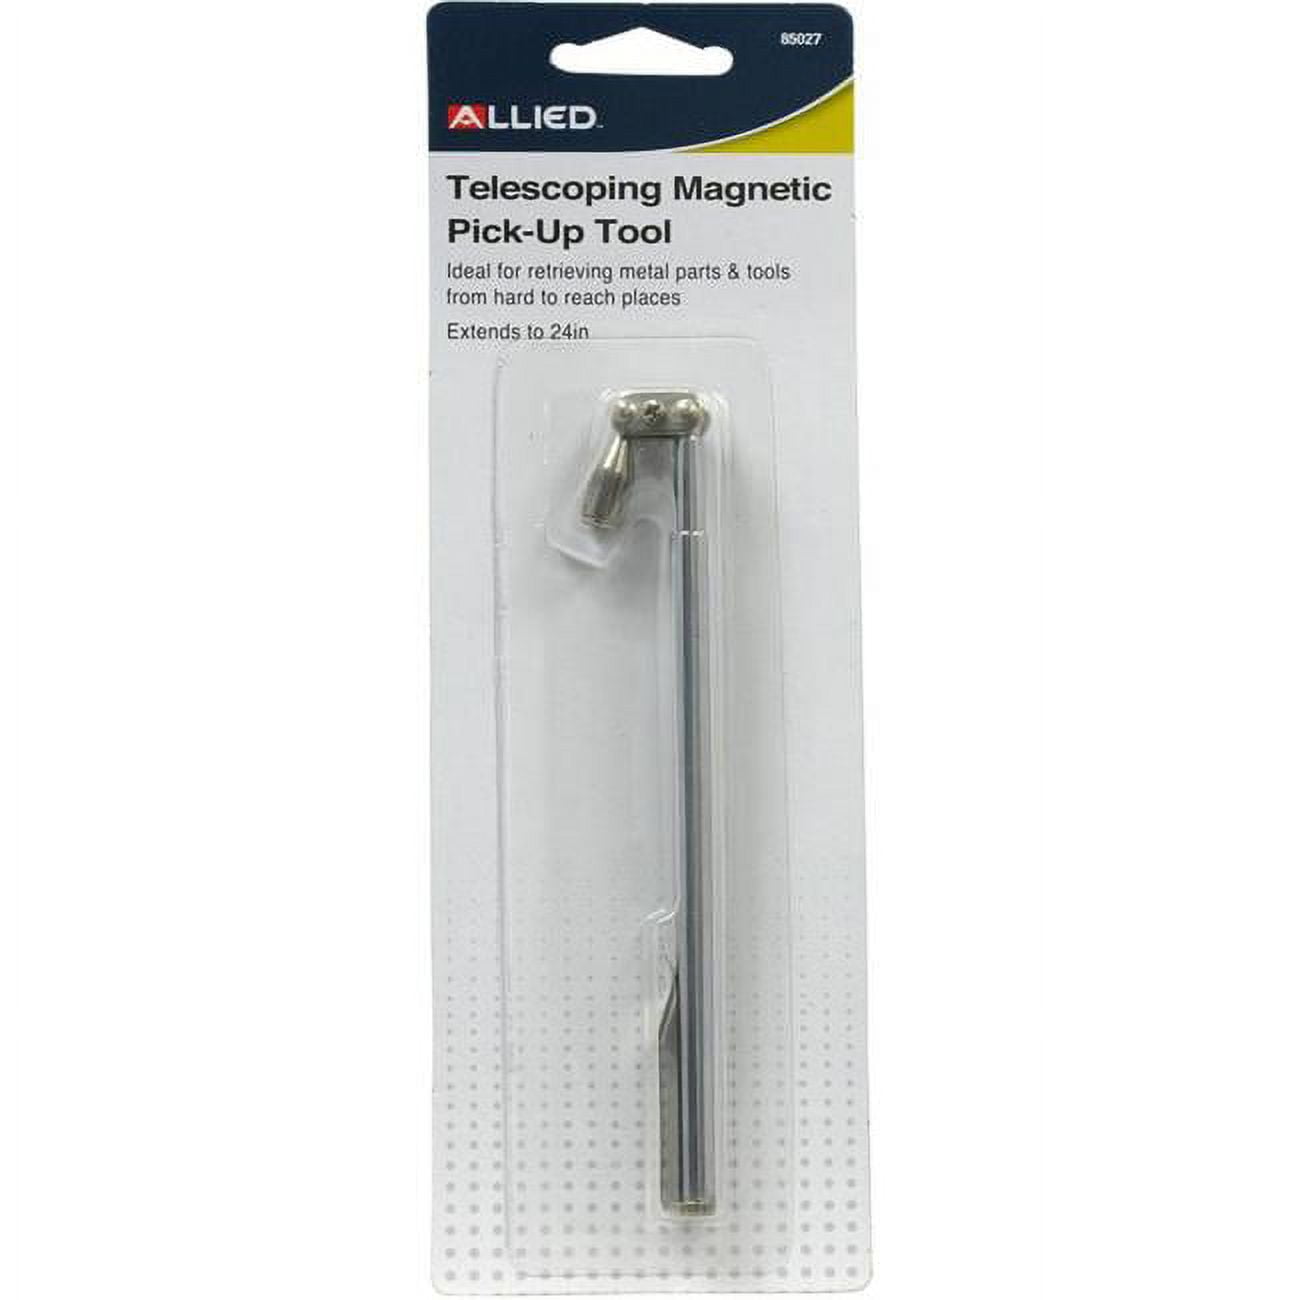 Picture of Allied 85027 Telescoping Magnetic Pick-Up Tool